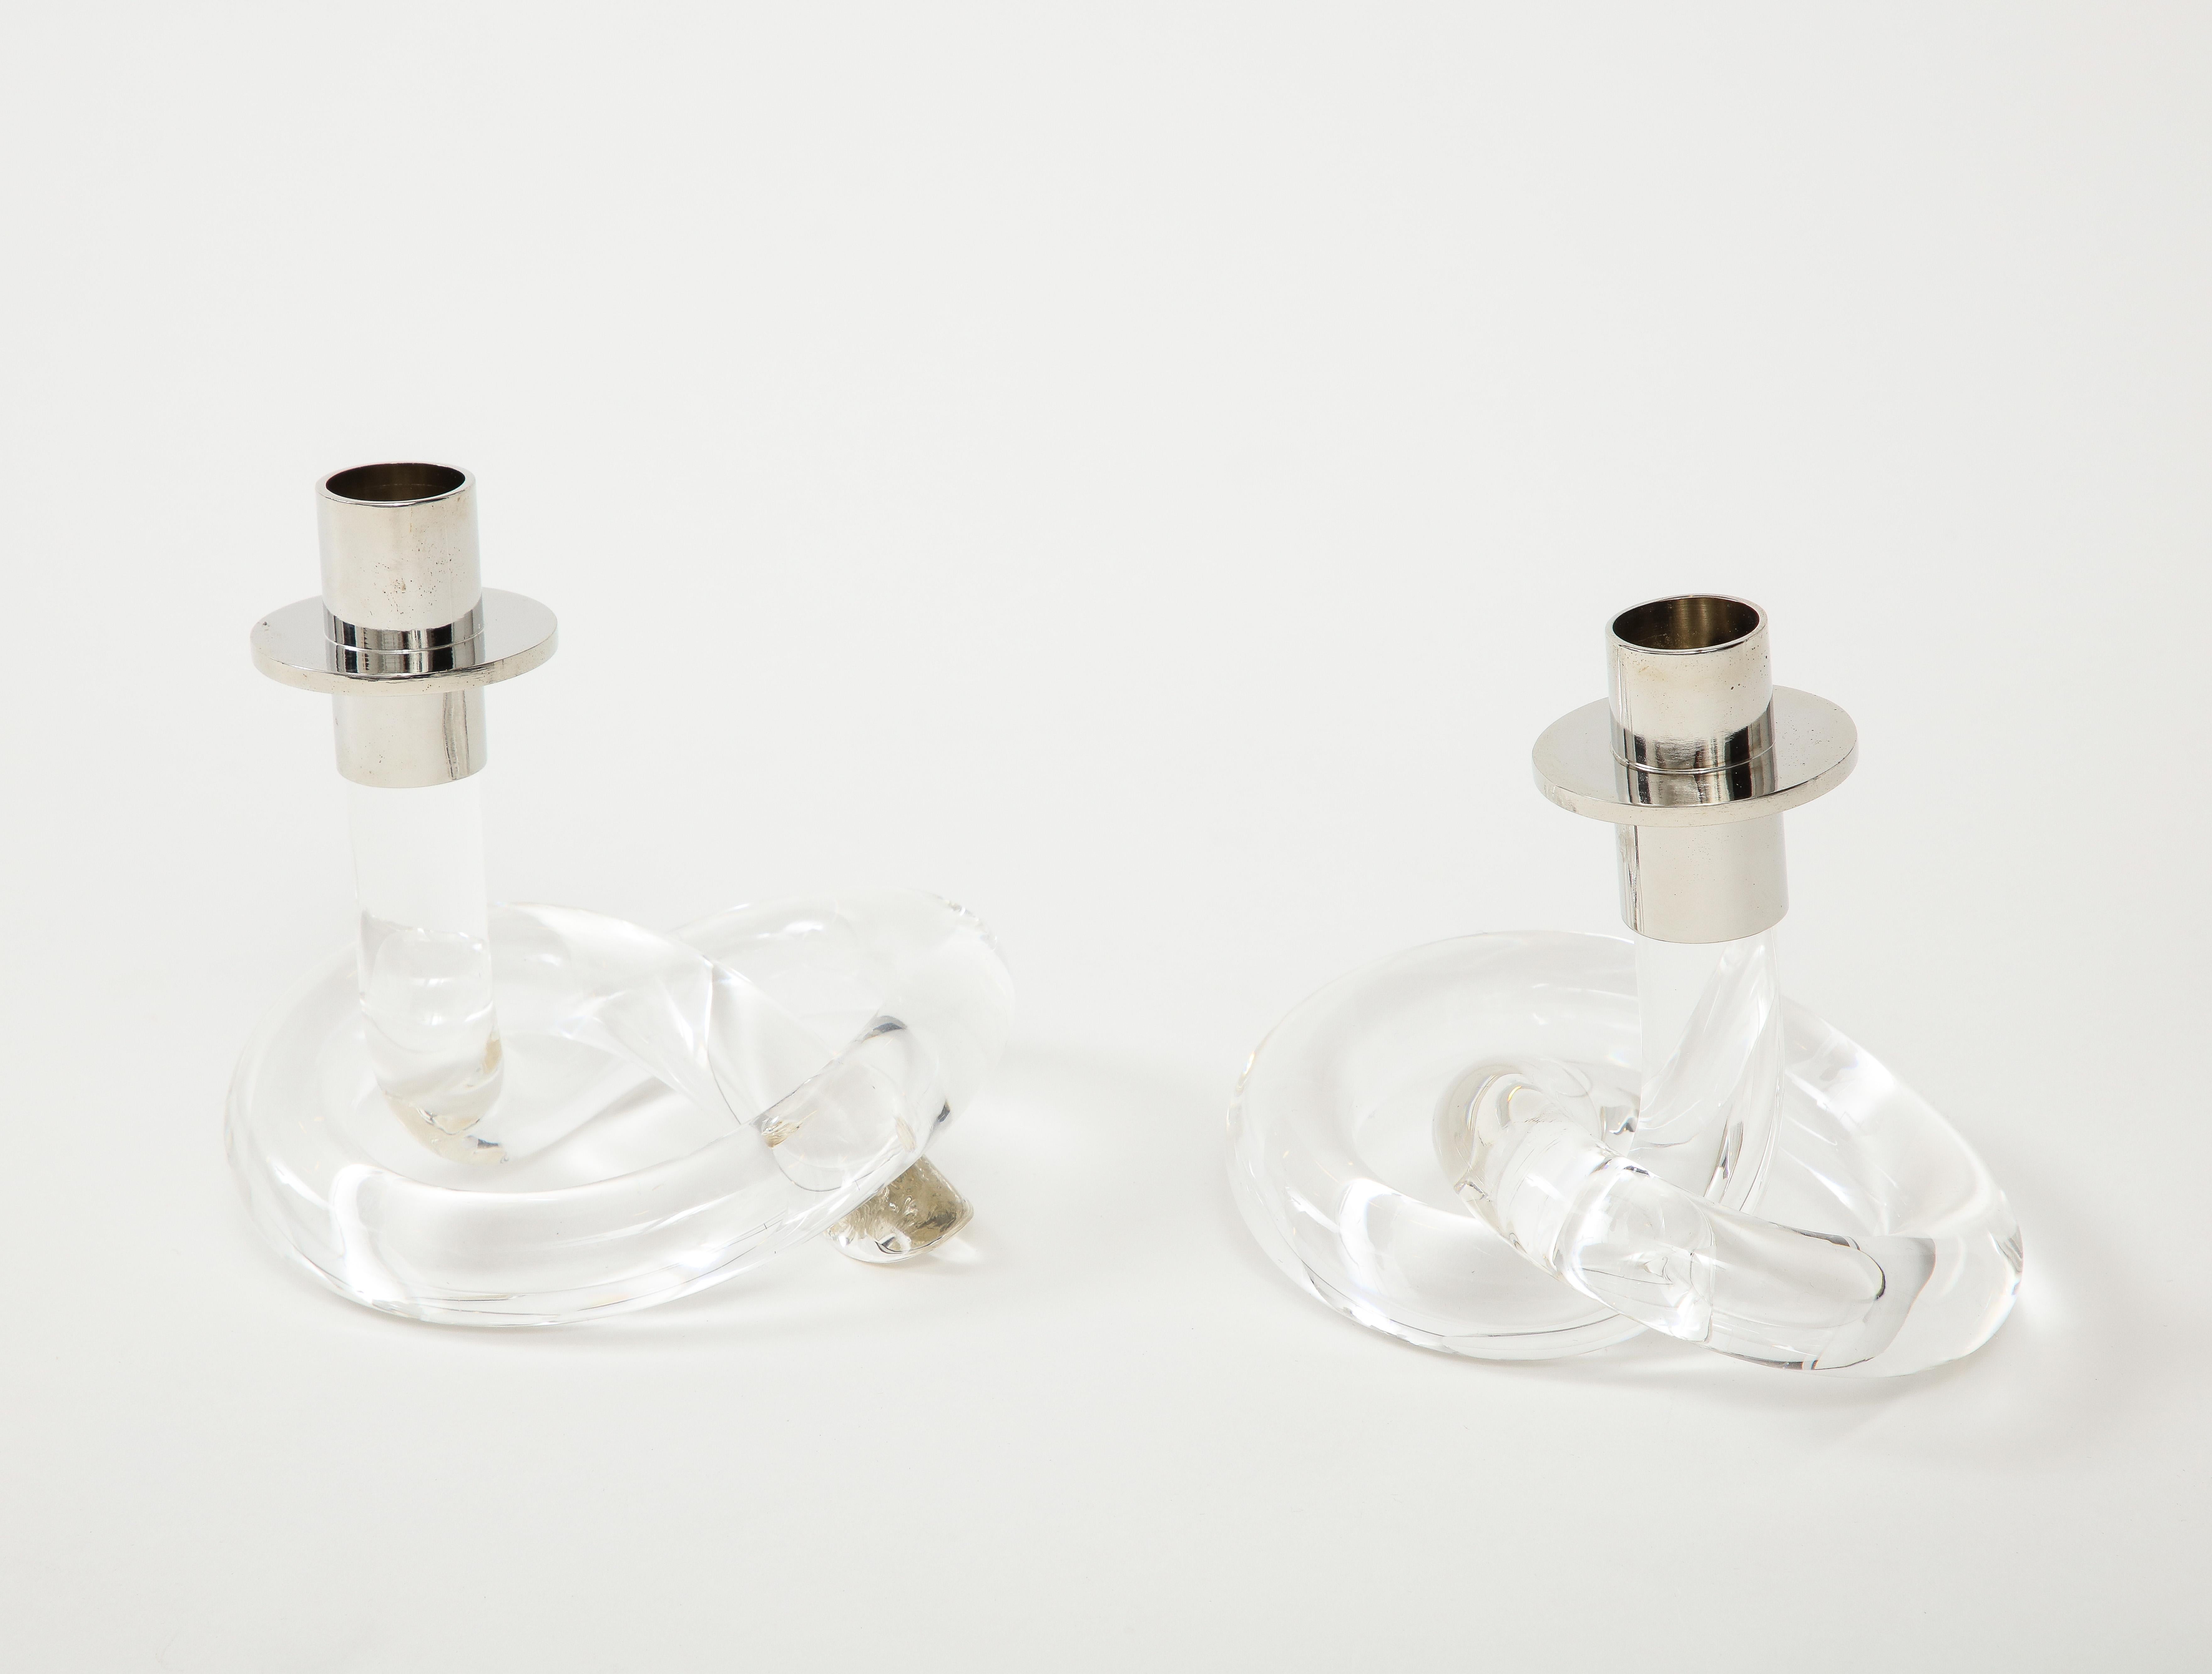 Pair of modernist Dorothy Thorpe lucite knot candlesticks perfect for any modern or traditional decor. Currently 3 pairs available.